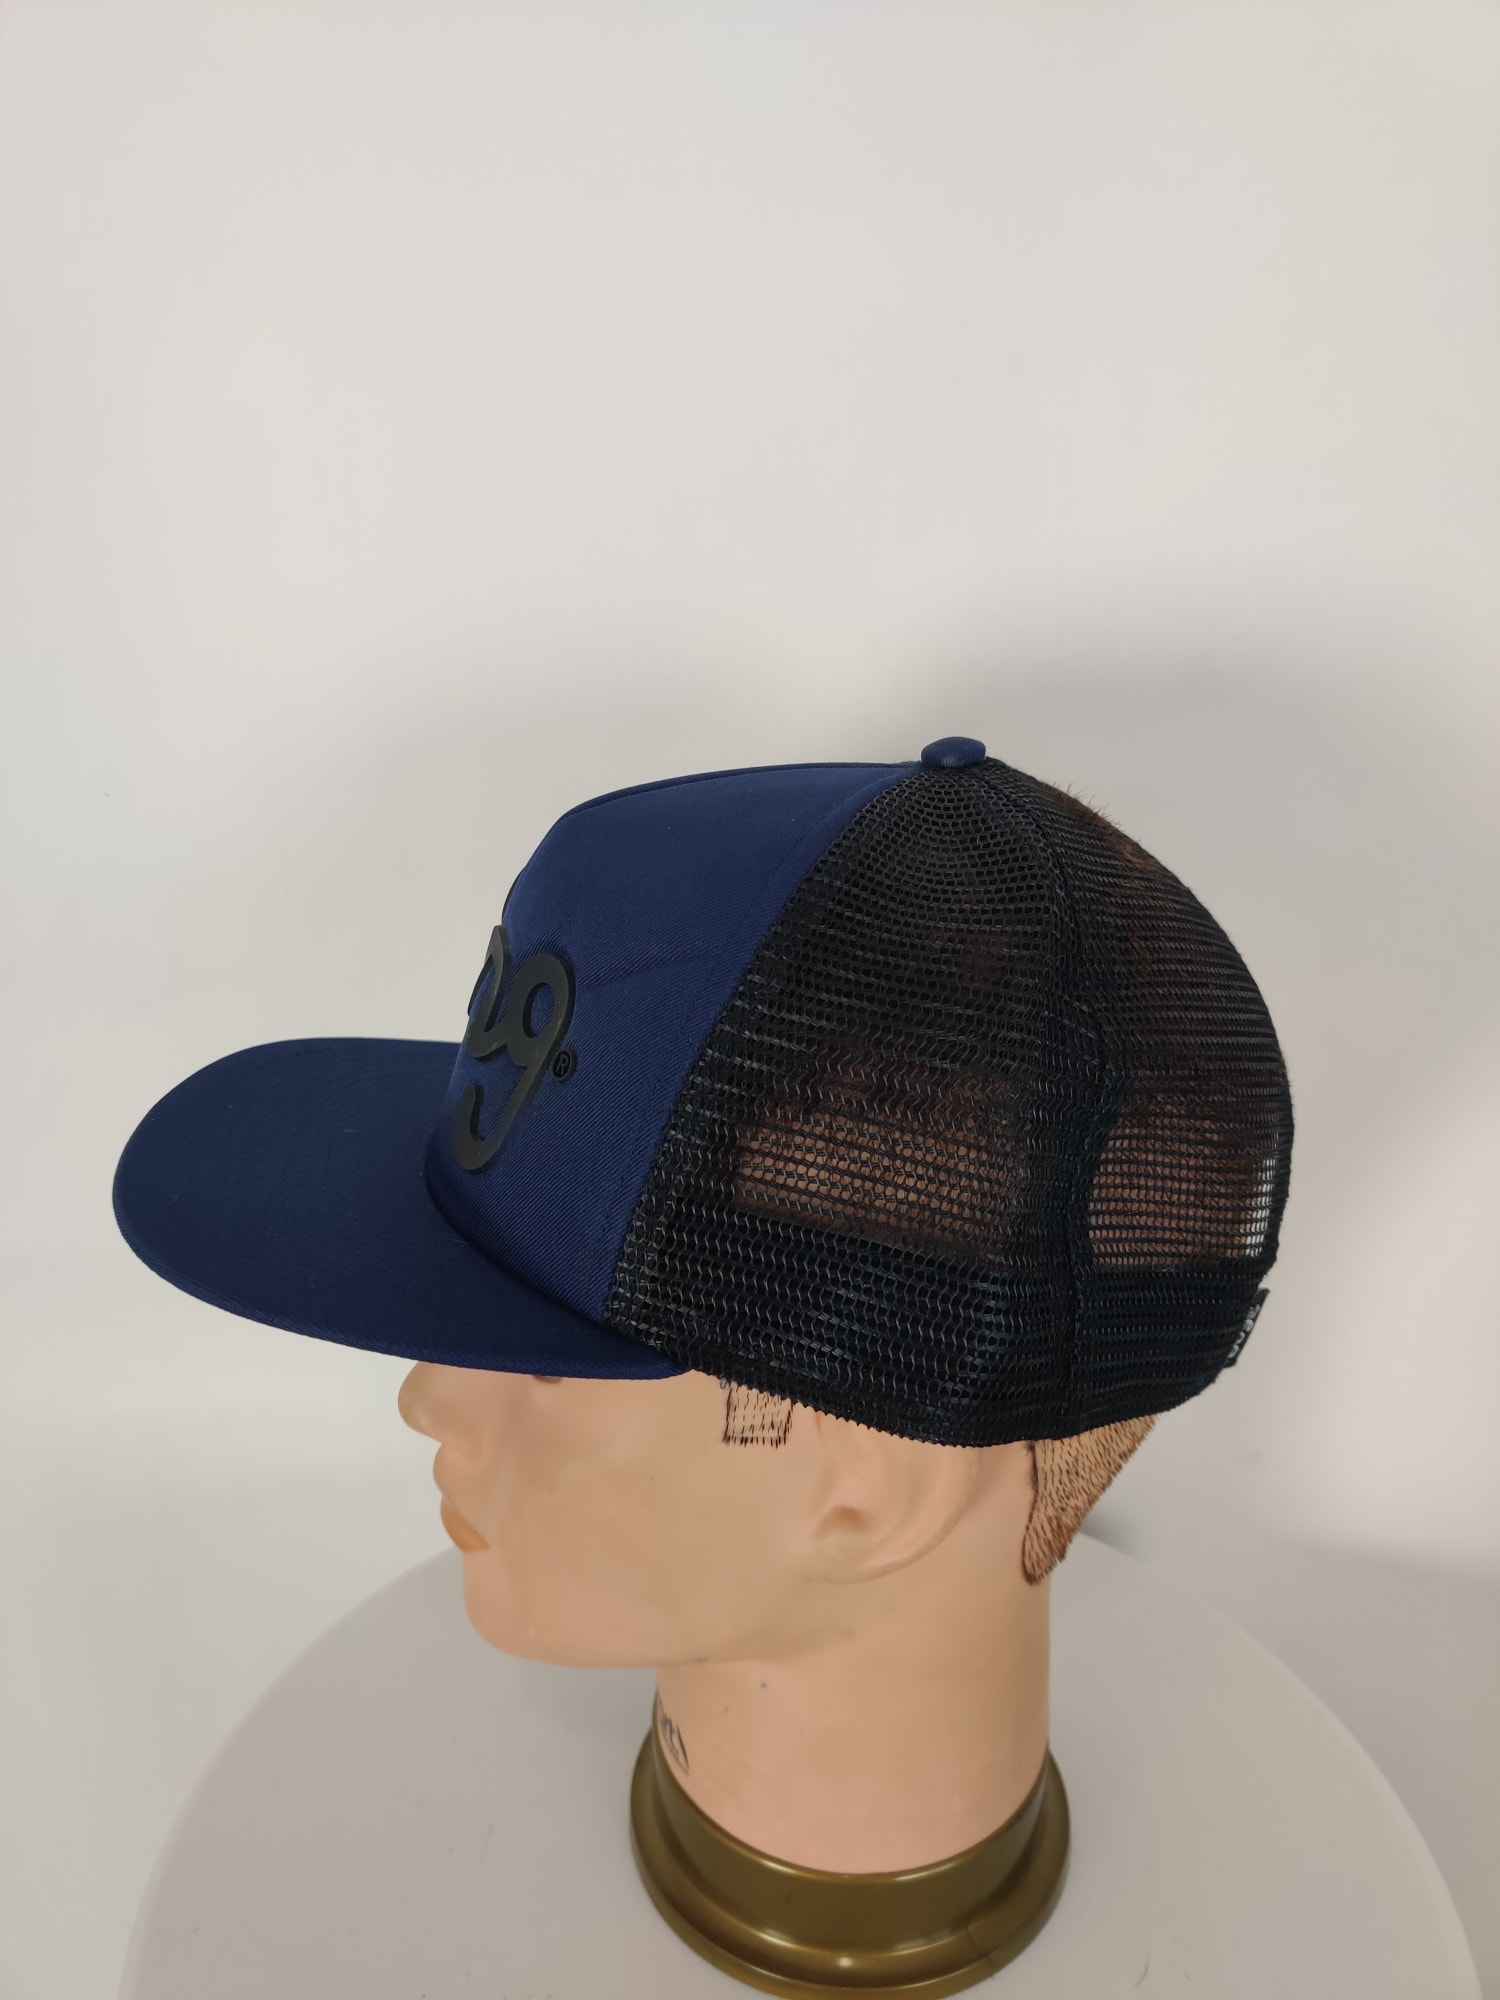 (V) ORIGINAL LRG Unisex hat hiking casual mesh back navy One size  - Picture 4 of 11